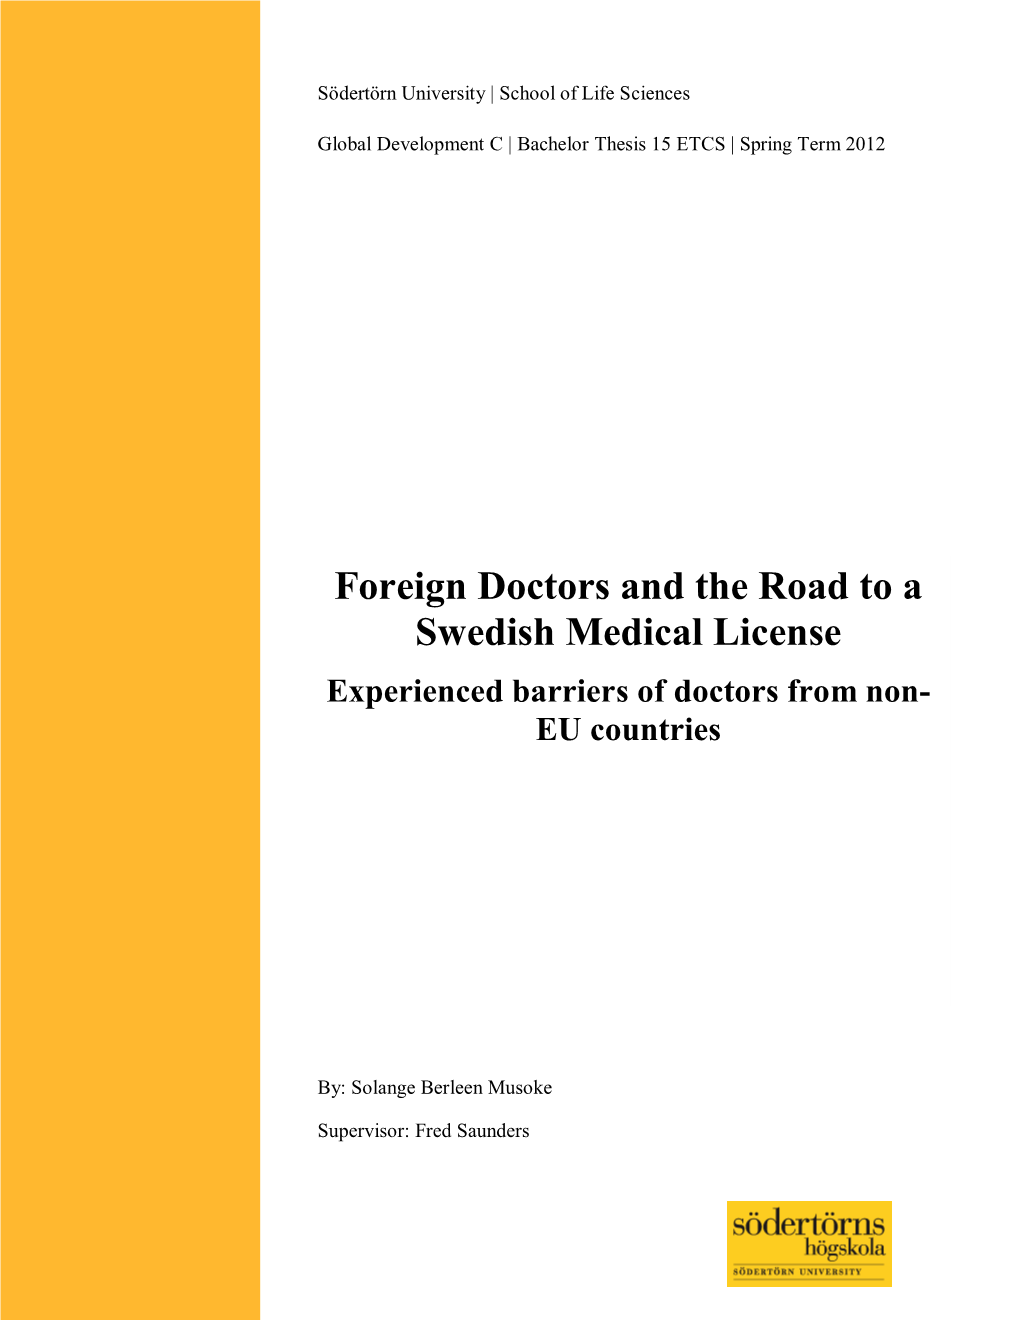 Foreign Doctors and the Road to a Swedish Medical License Experienced Barriers of Doctors from Non- EU Countries